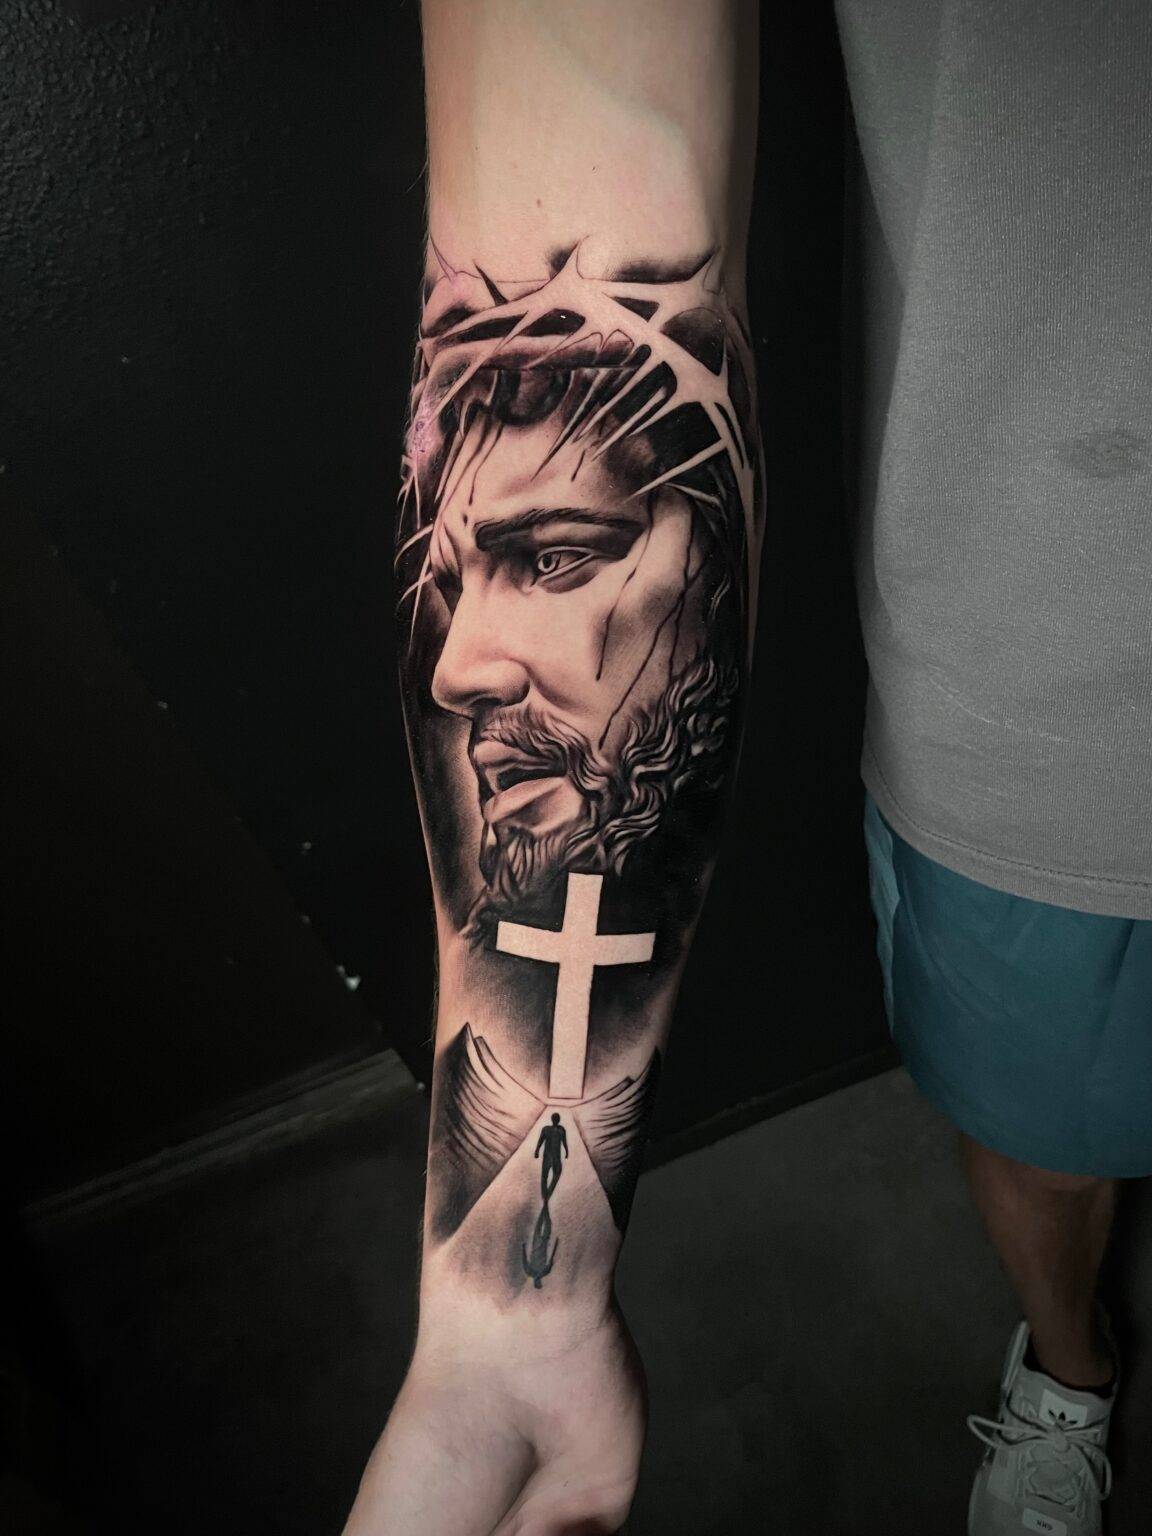 Jesus portrait tattoo - a powerful and reverent depiction